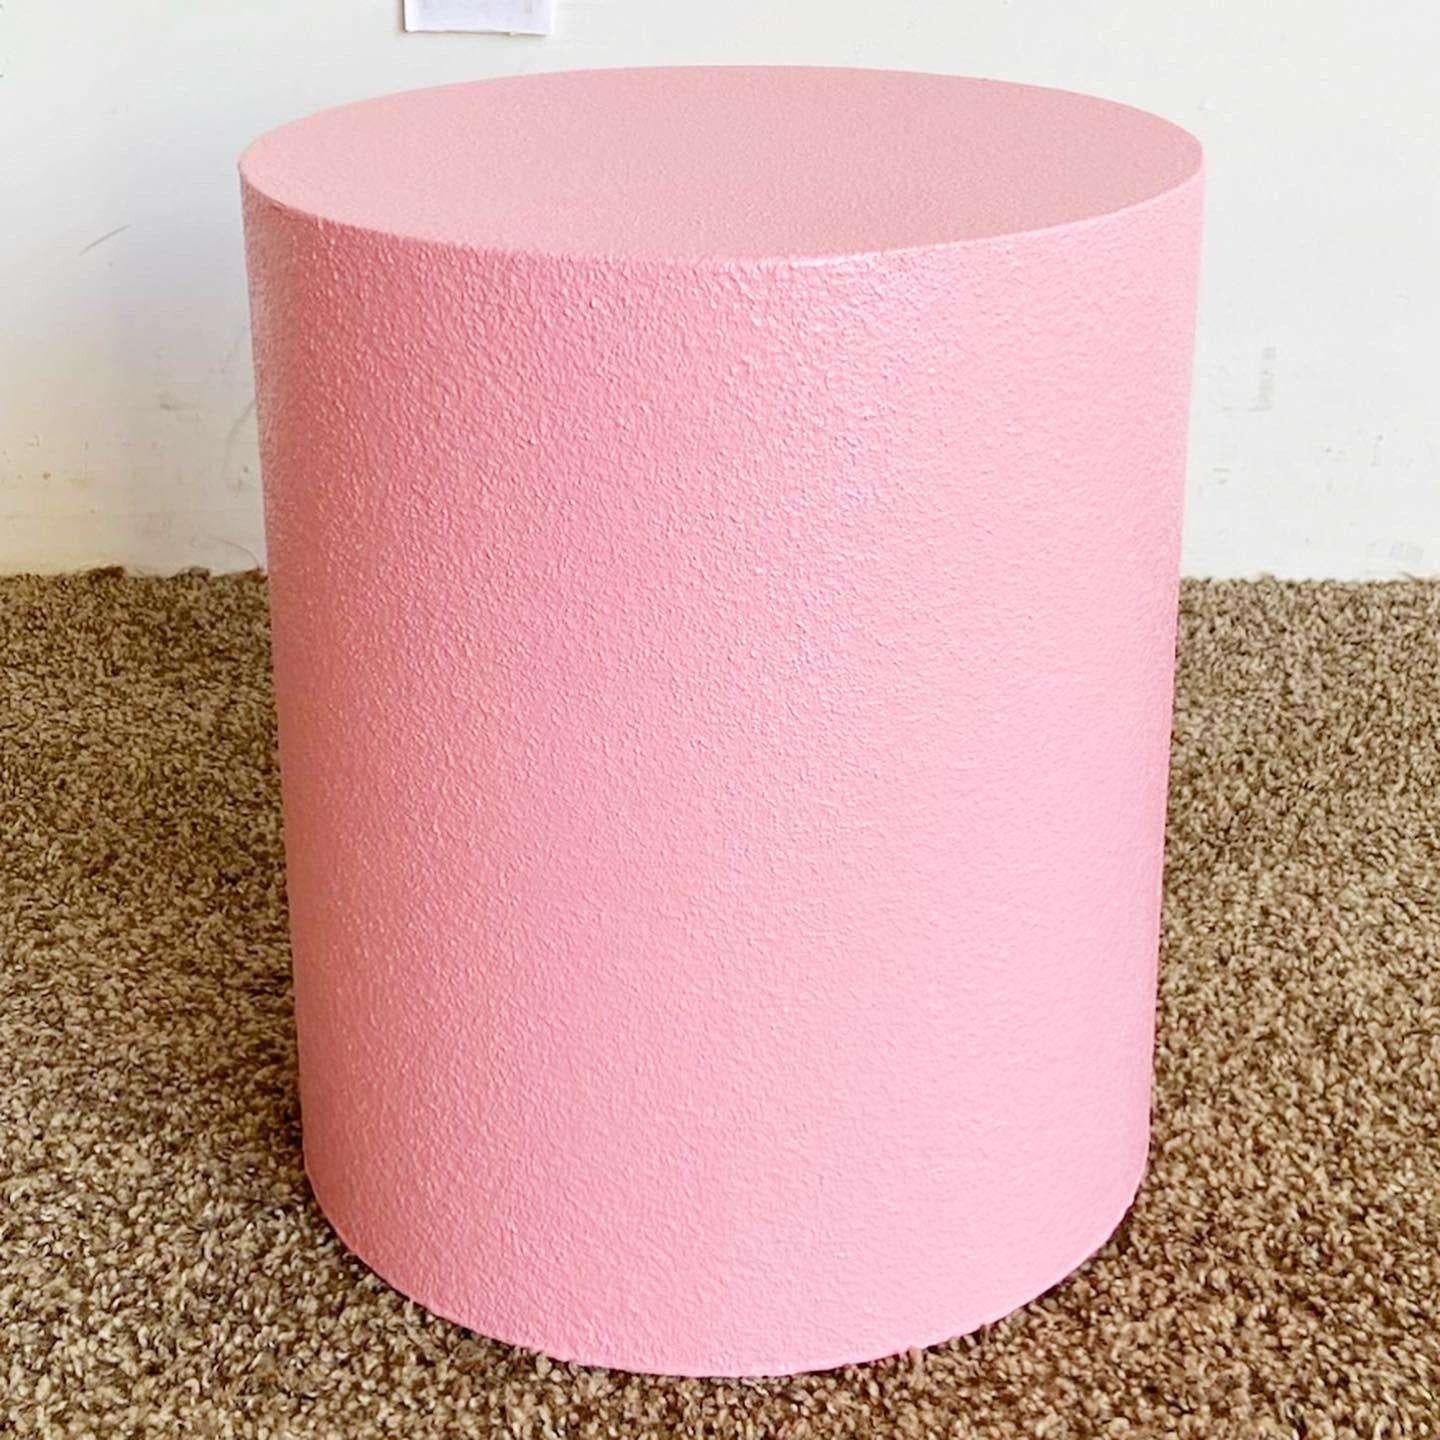 Postmodern Pink Textured Finish Cylindrical Pedestals - a Pair In Good Condition For Sale In Delray Beach, FL